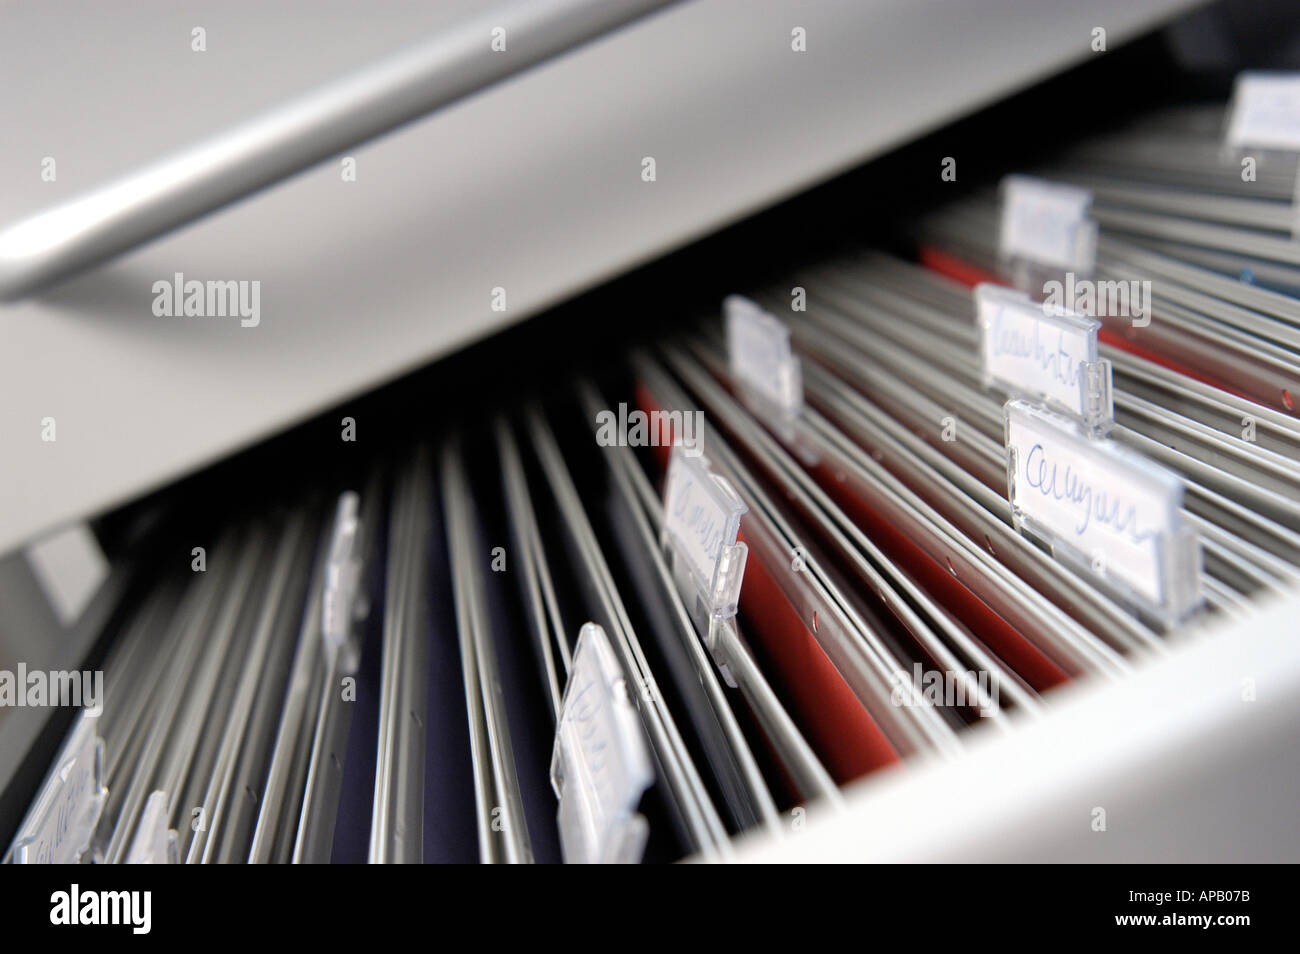 Old fashioned suspension files with title labels, hanging in a filing cabinet. Stock Photo